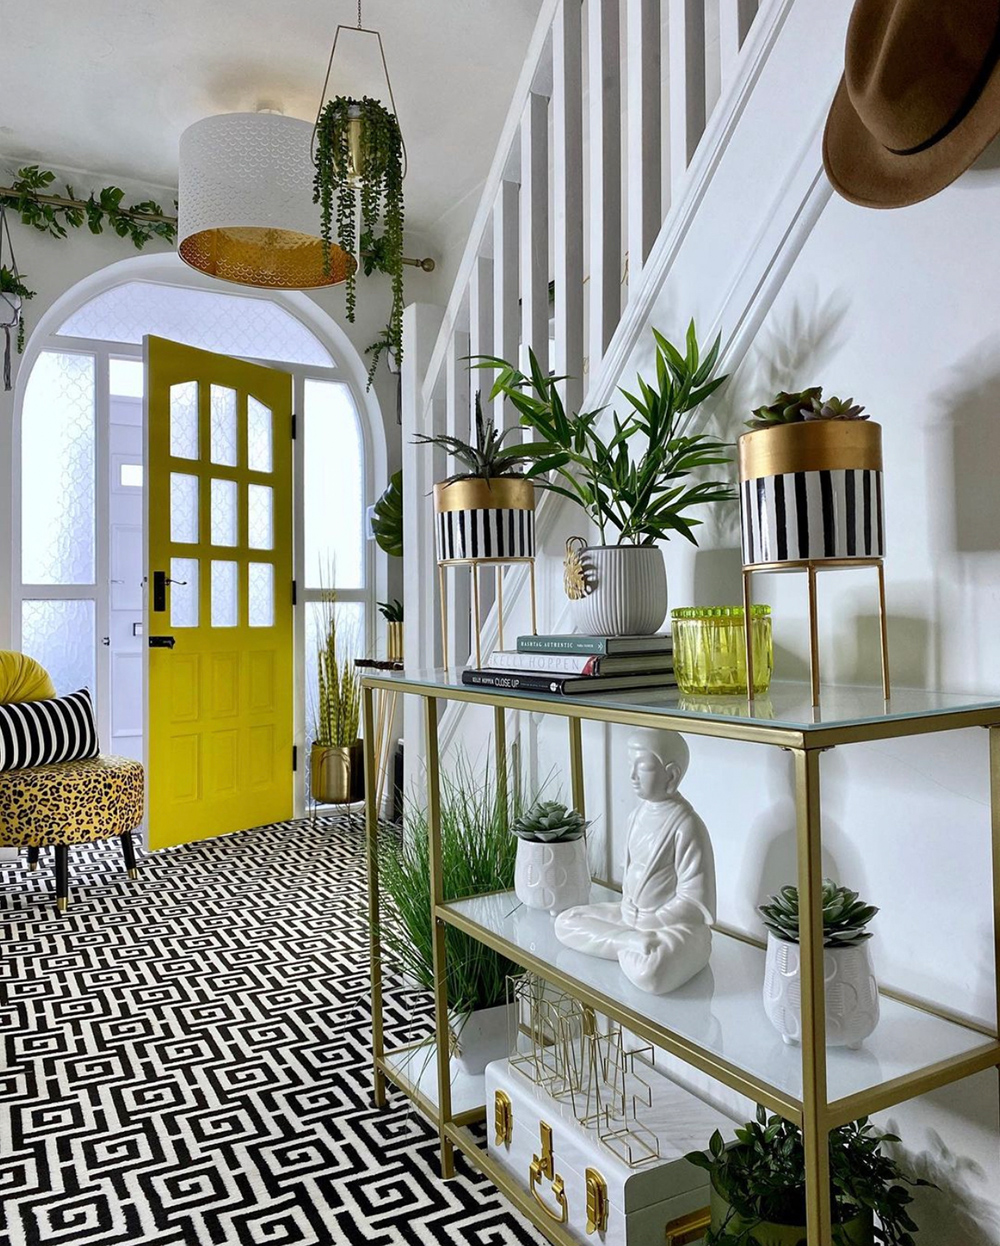 Stunning hallway inspiration with monochrome patterned carpet and yellow front door